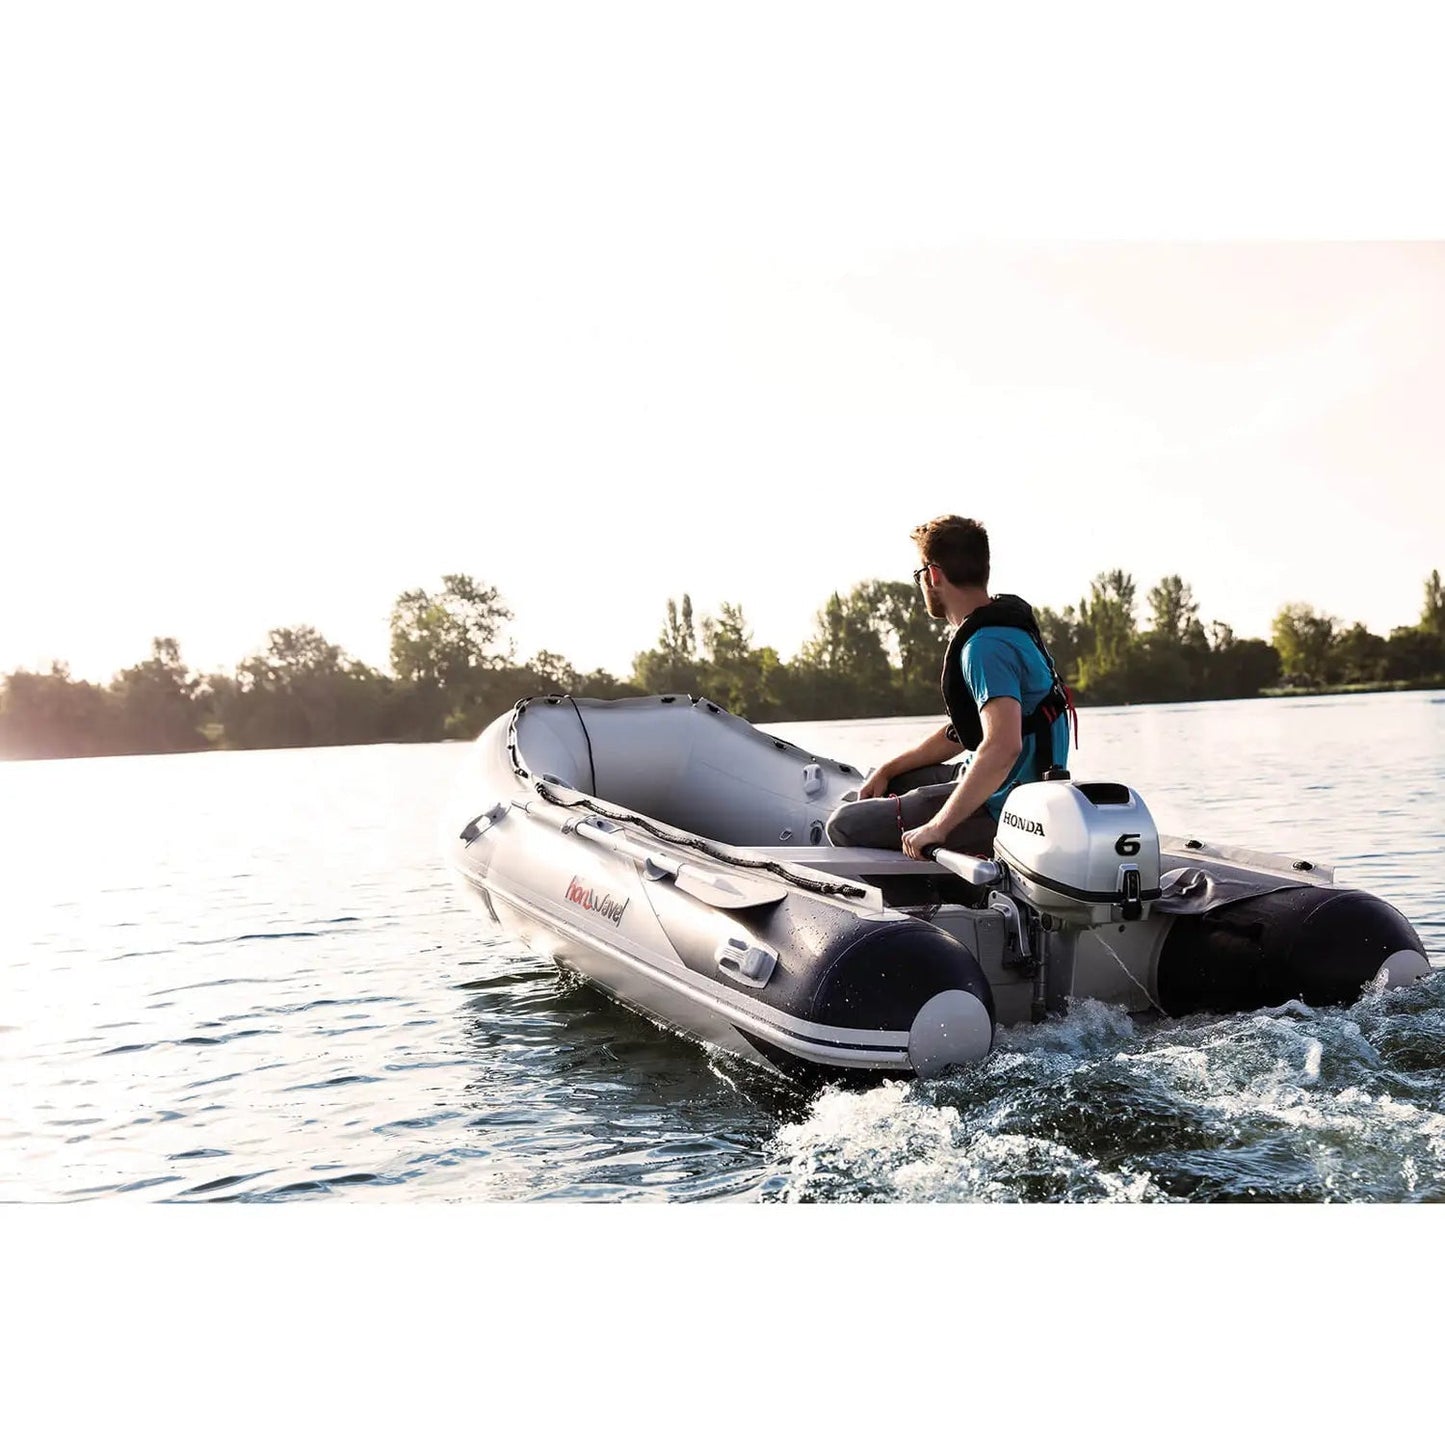 Honwave Package - T32IE3 3.2m Inflatable Boat Dinghy Air V-Floor & Honda Bf15 15hp Outboard Engine